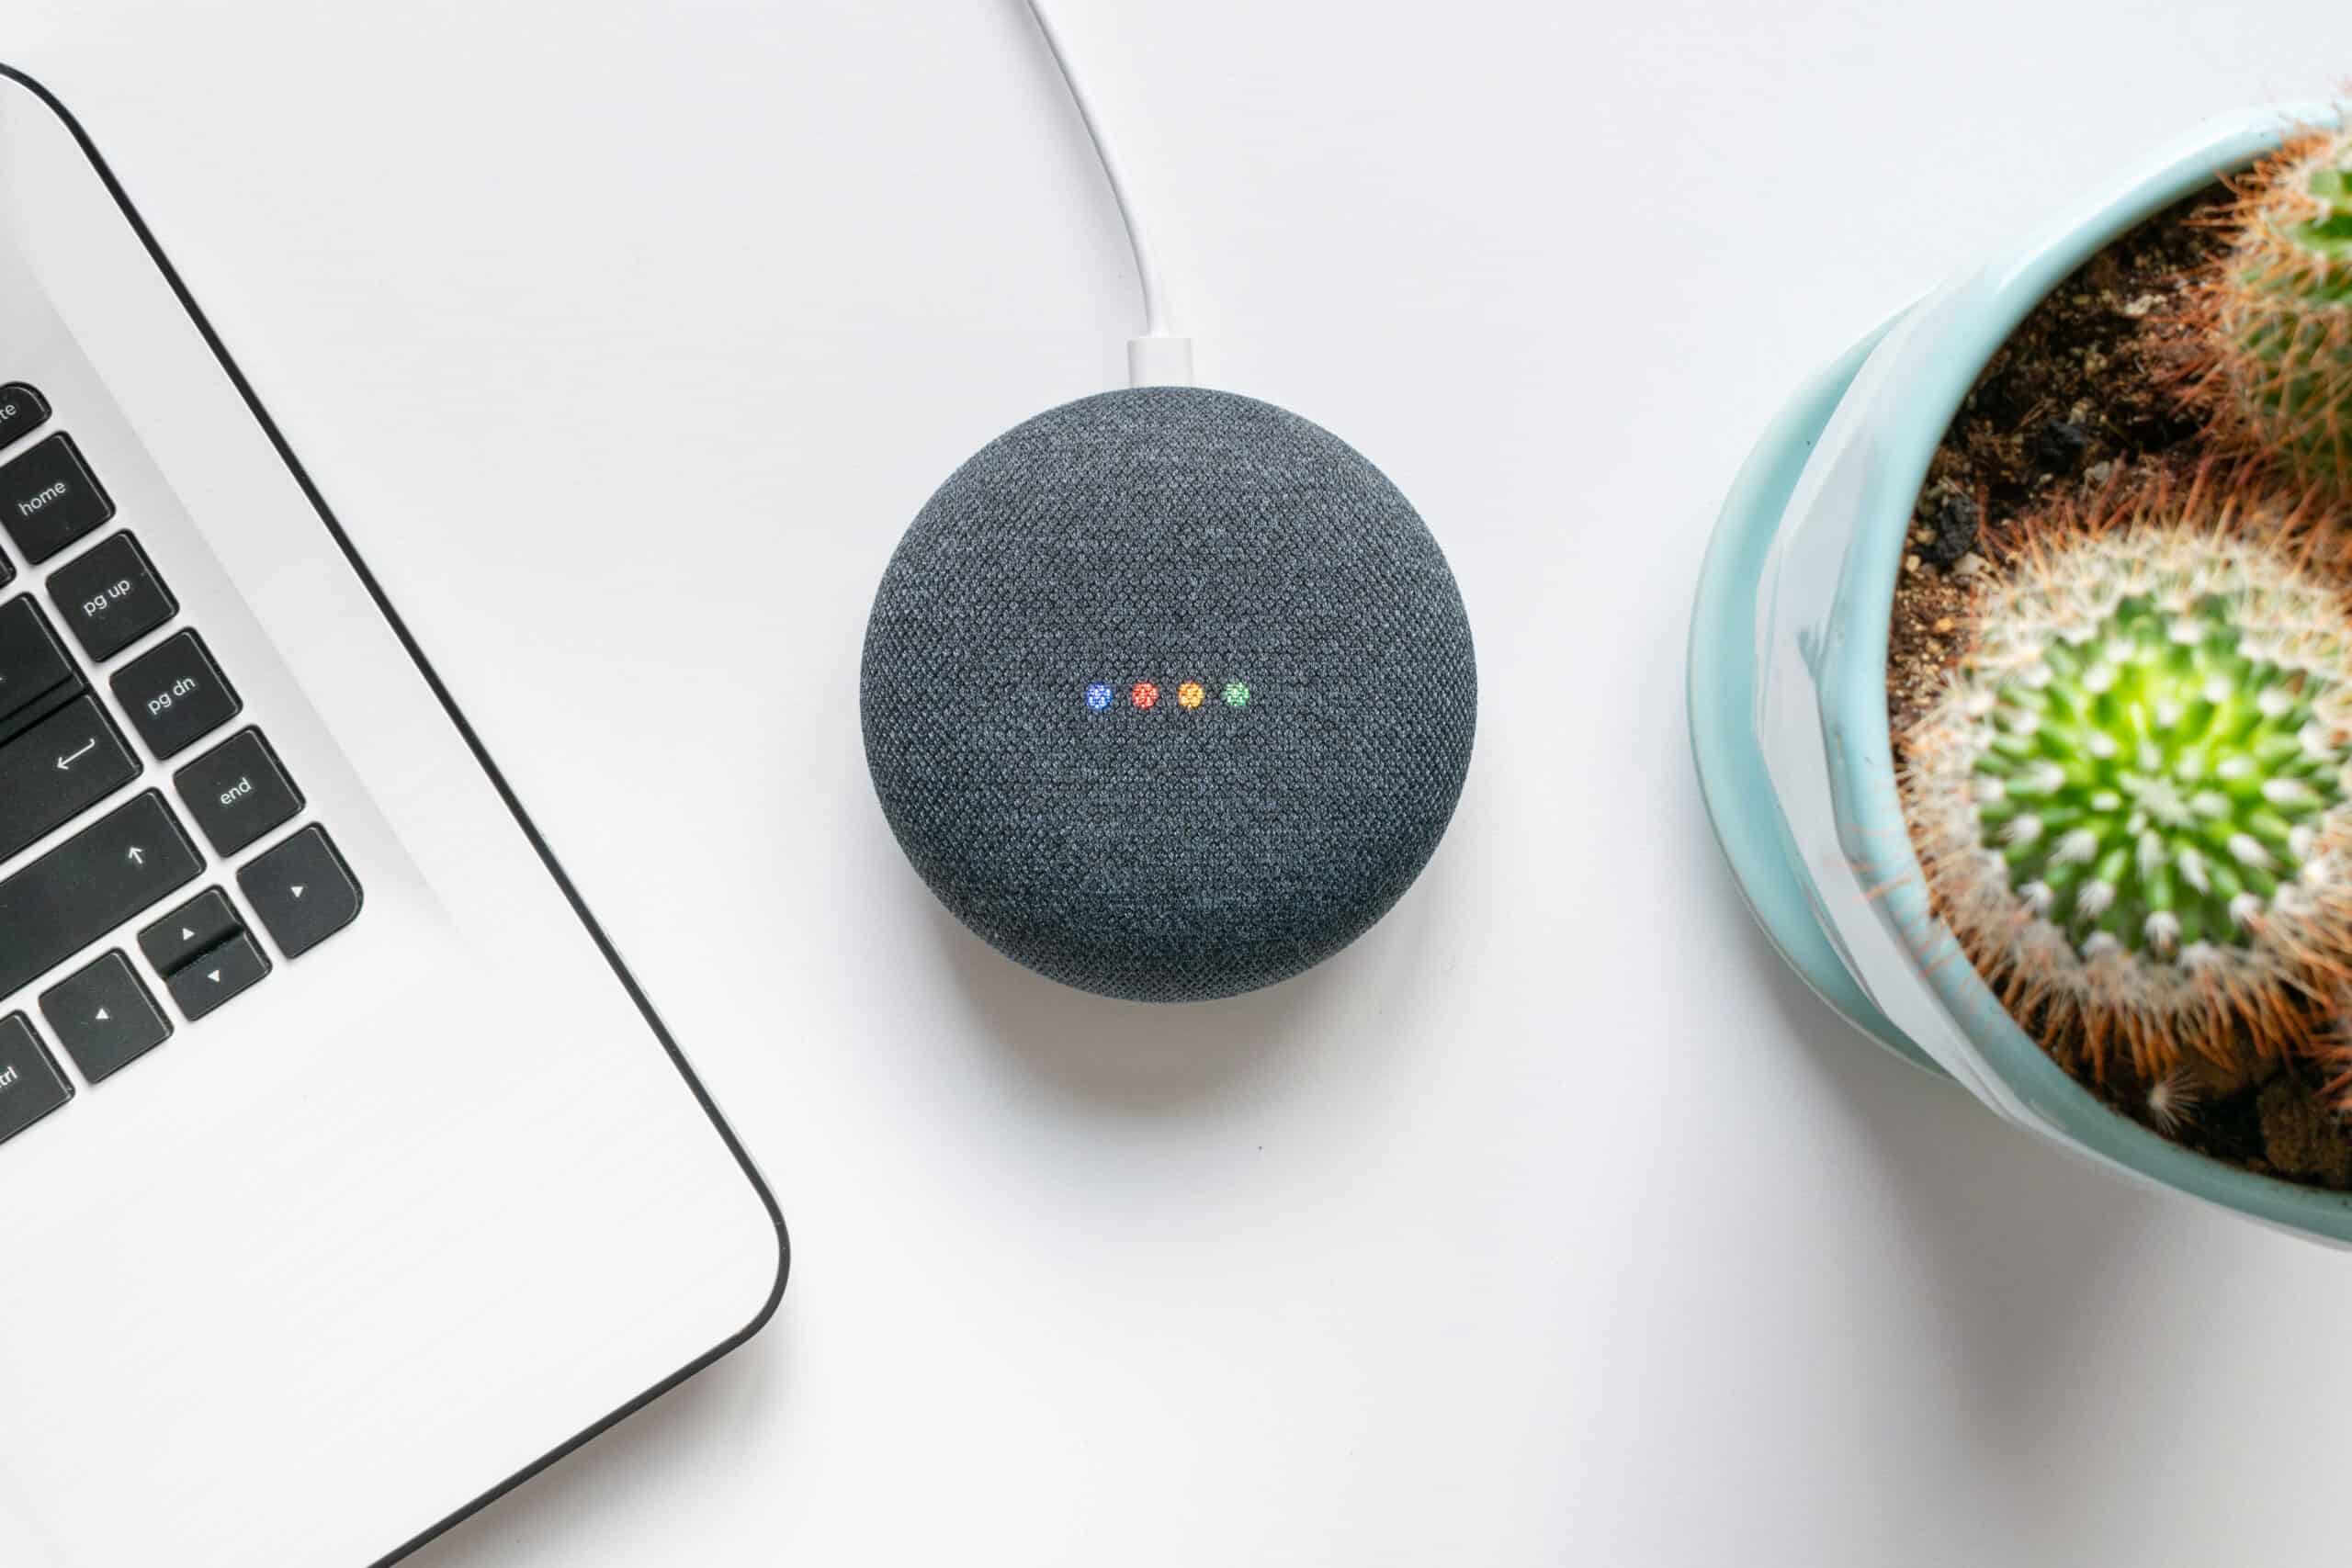 Google Home mini smart speaker on a table with a laptop and cactus